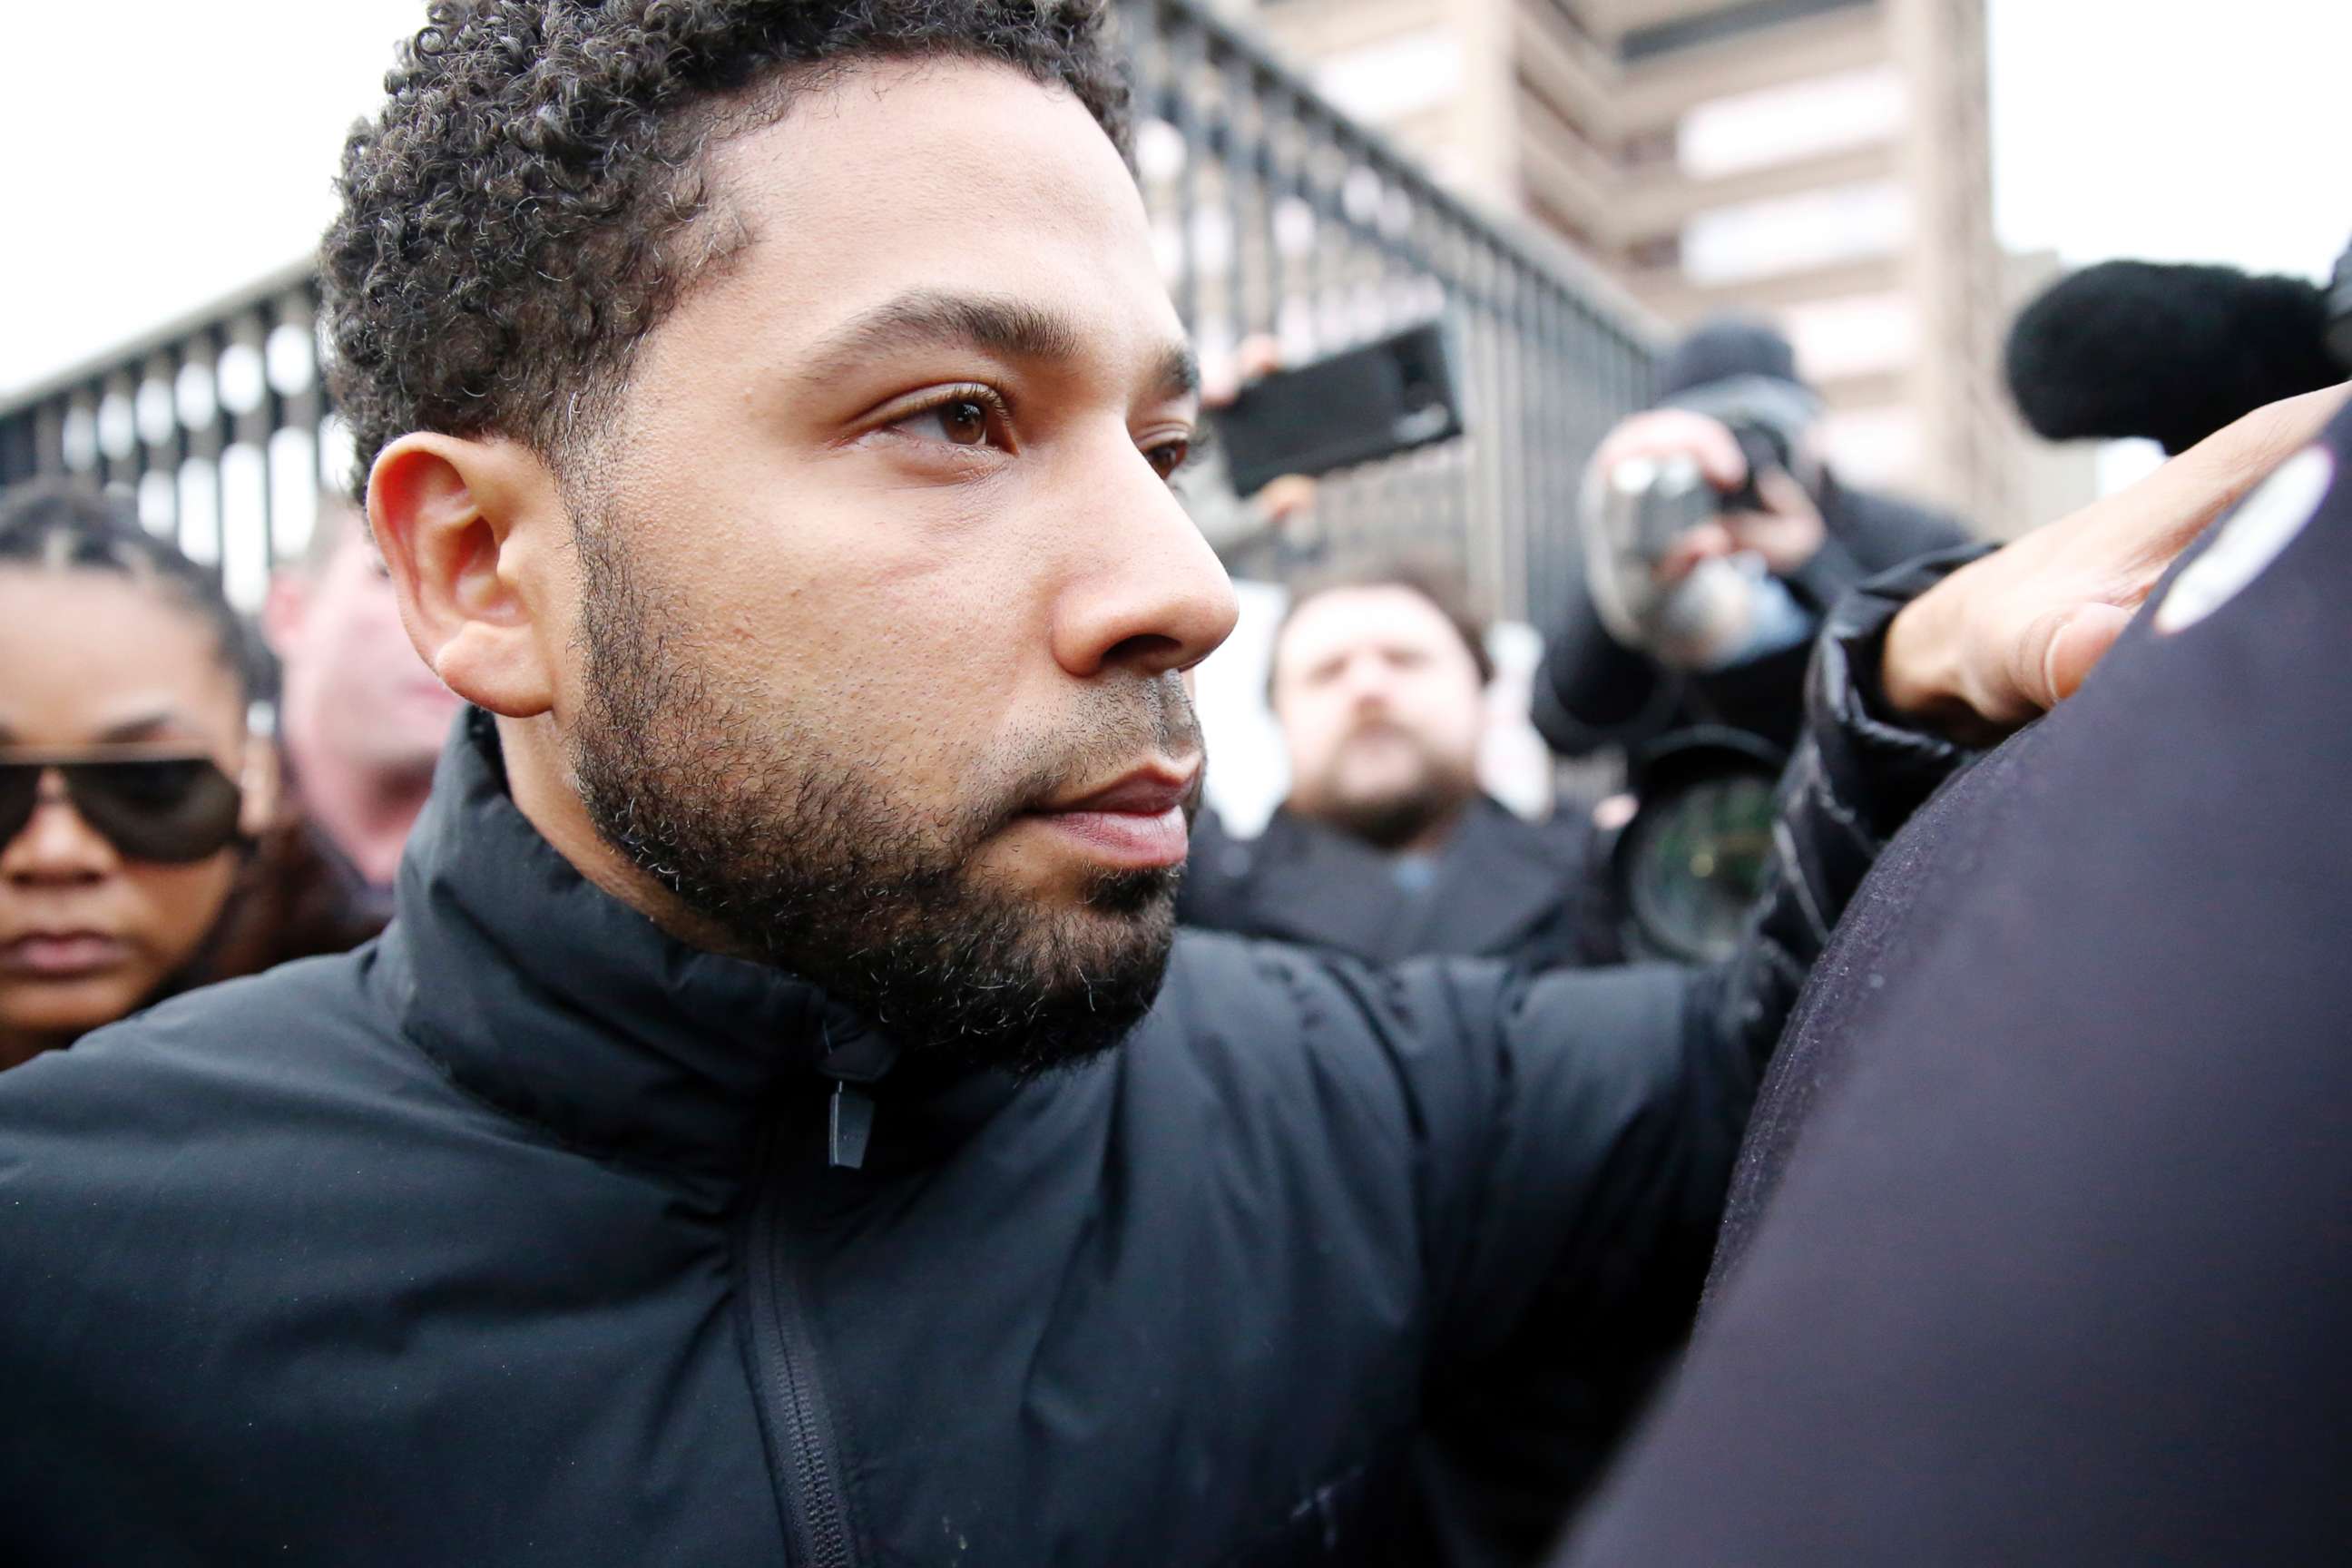 PHOTO: Empire actor Jussie Smollett leaves Cook County jail after posting bond, Feb. 21, 2019, in Chicago.